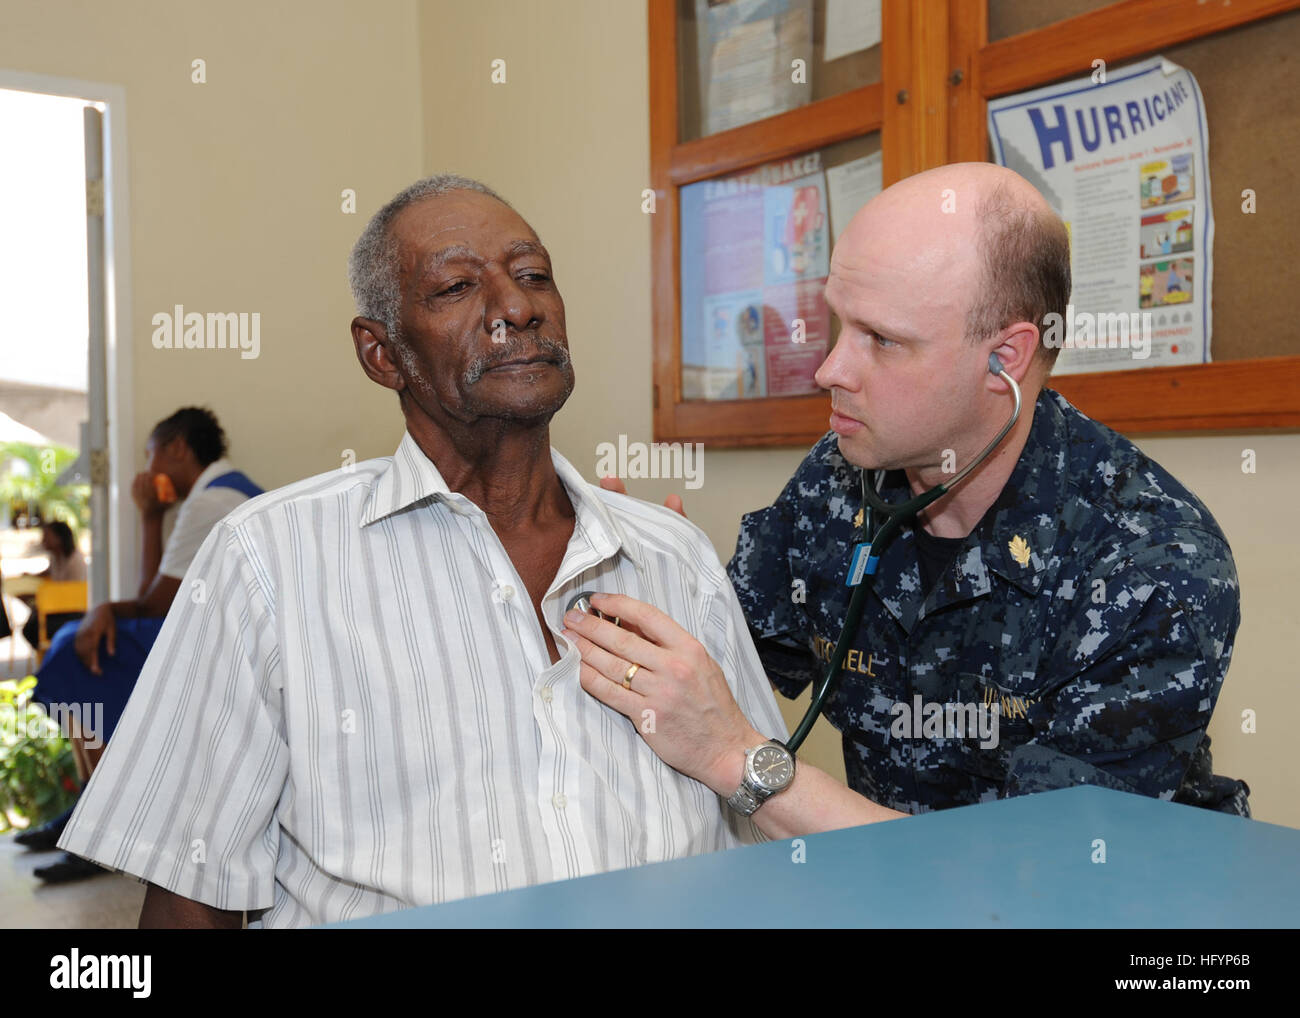 110413-N-NY820-065  KINGSTON, Jamaica (April 13, 2011) Lt. Cmdr. Karl Mitchell examines a Jamaican man on the first day of medical screening during Continuing Promise 2011 (CP11). CP11 is a five-month humanitarian assistance mission in the Caribbean, Central and South America. (U.S. Navy photo by Mass Communication Specialist 2nd Class Eric C. Tretter/Released) US Navy 110413-N-NY820-065 Lt. Cmdr. Karl Mitchell examines a Jamaican man on the first day of medical screening during Continuing Promise 2011 (CP Stock Photo